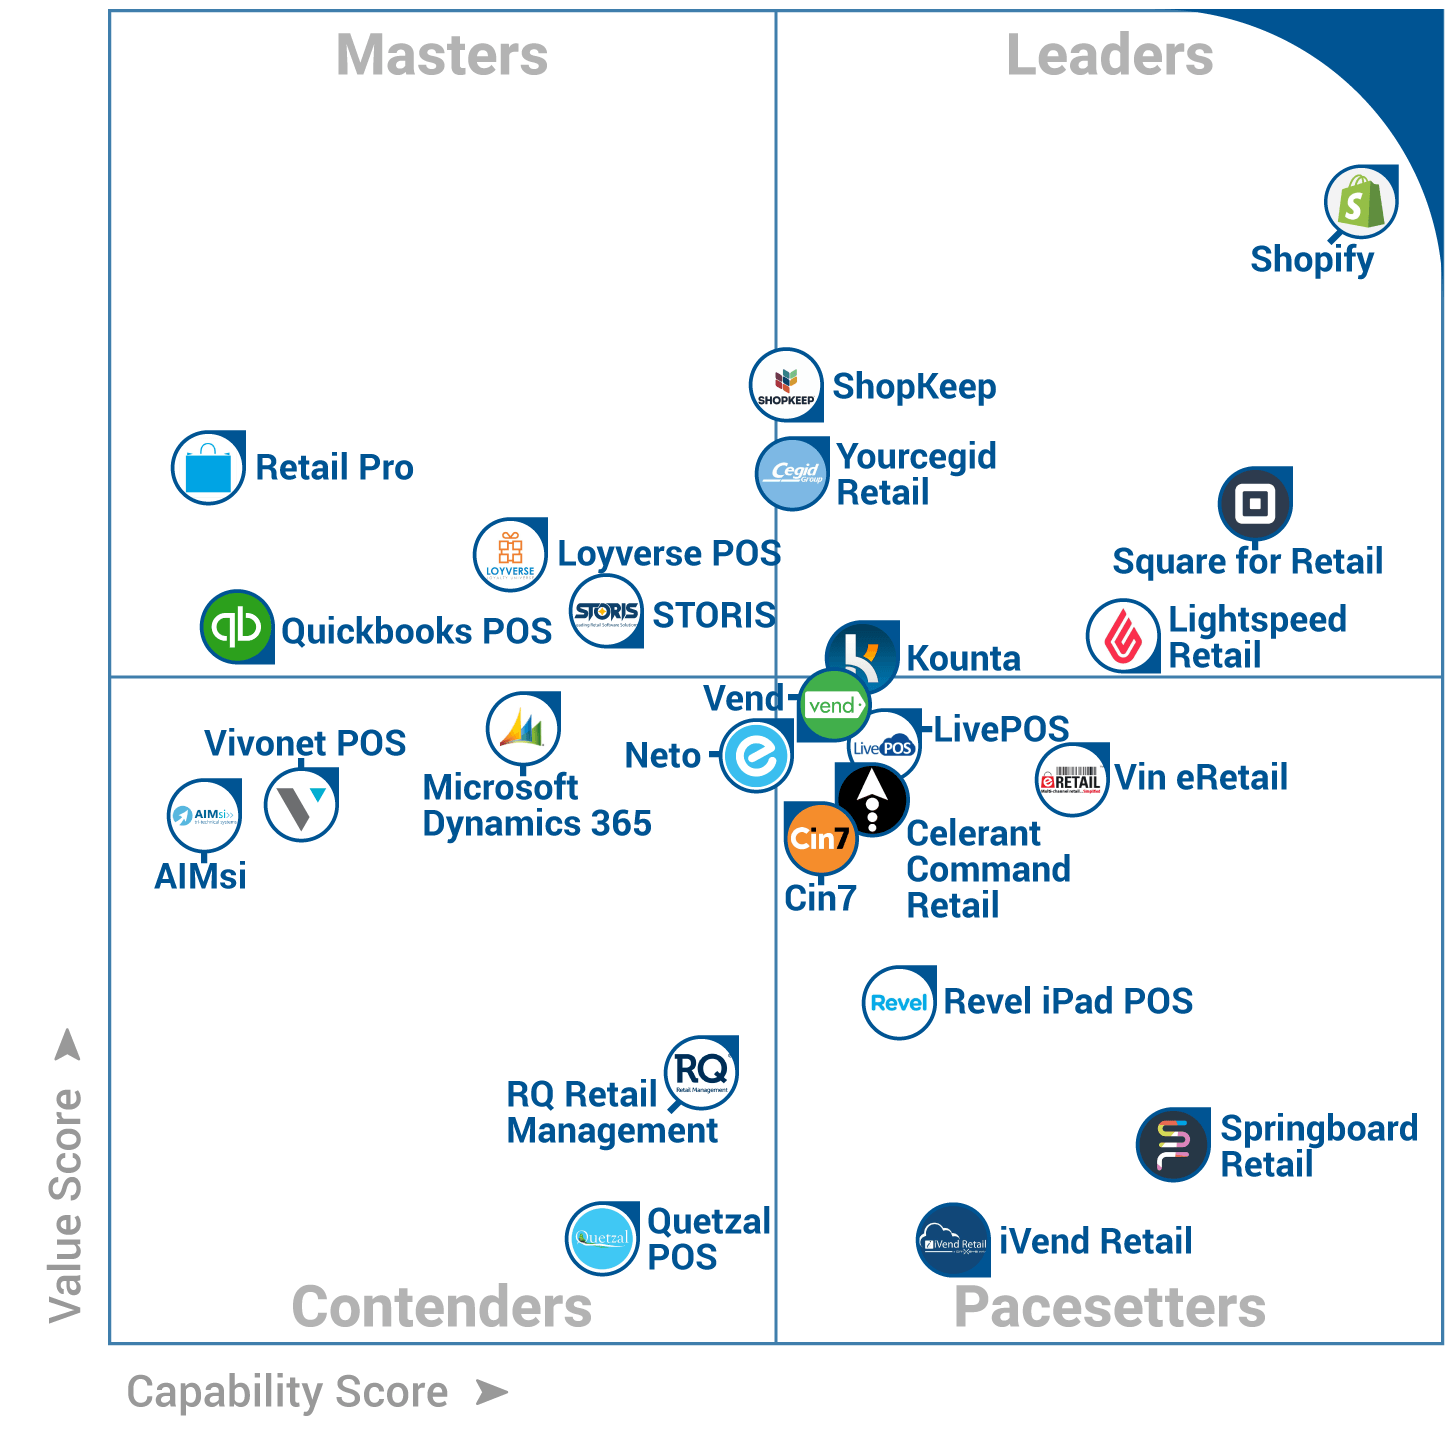 July 2017 FrontRunners Quadrant for Retail Software